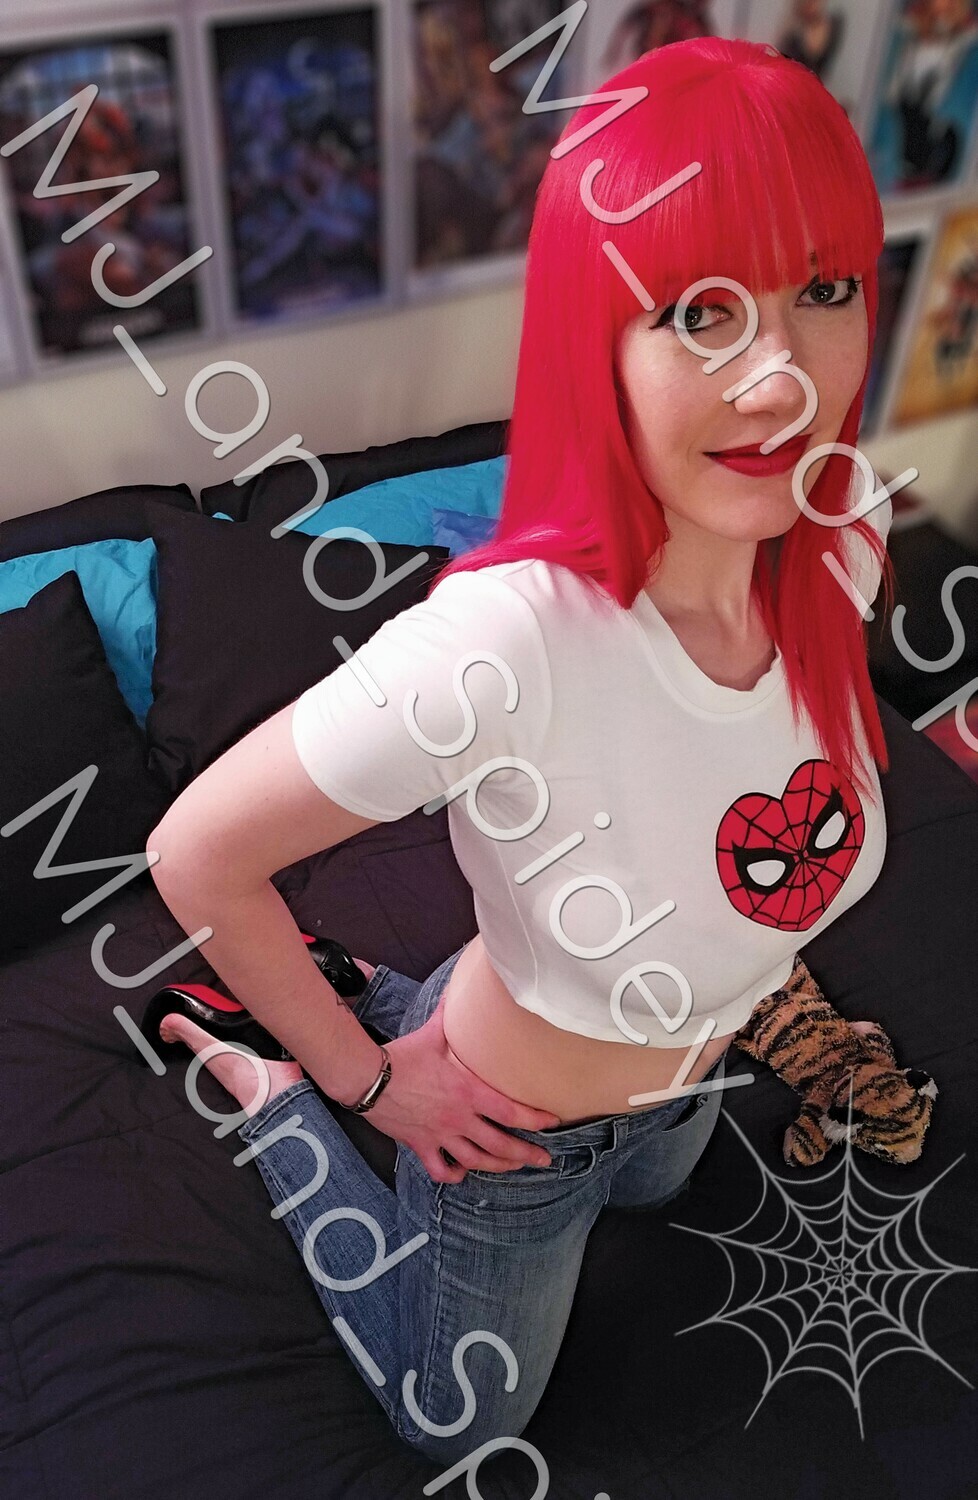 Marvel - Spider-Man - Mary Jane Watson - Classic 14 - 11x17 Cosplay Print (@MJ_and_Spidey, MJ and Spidey, Comics)